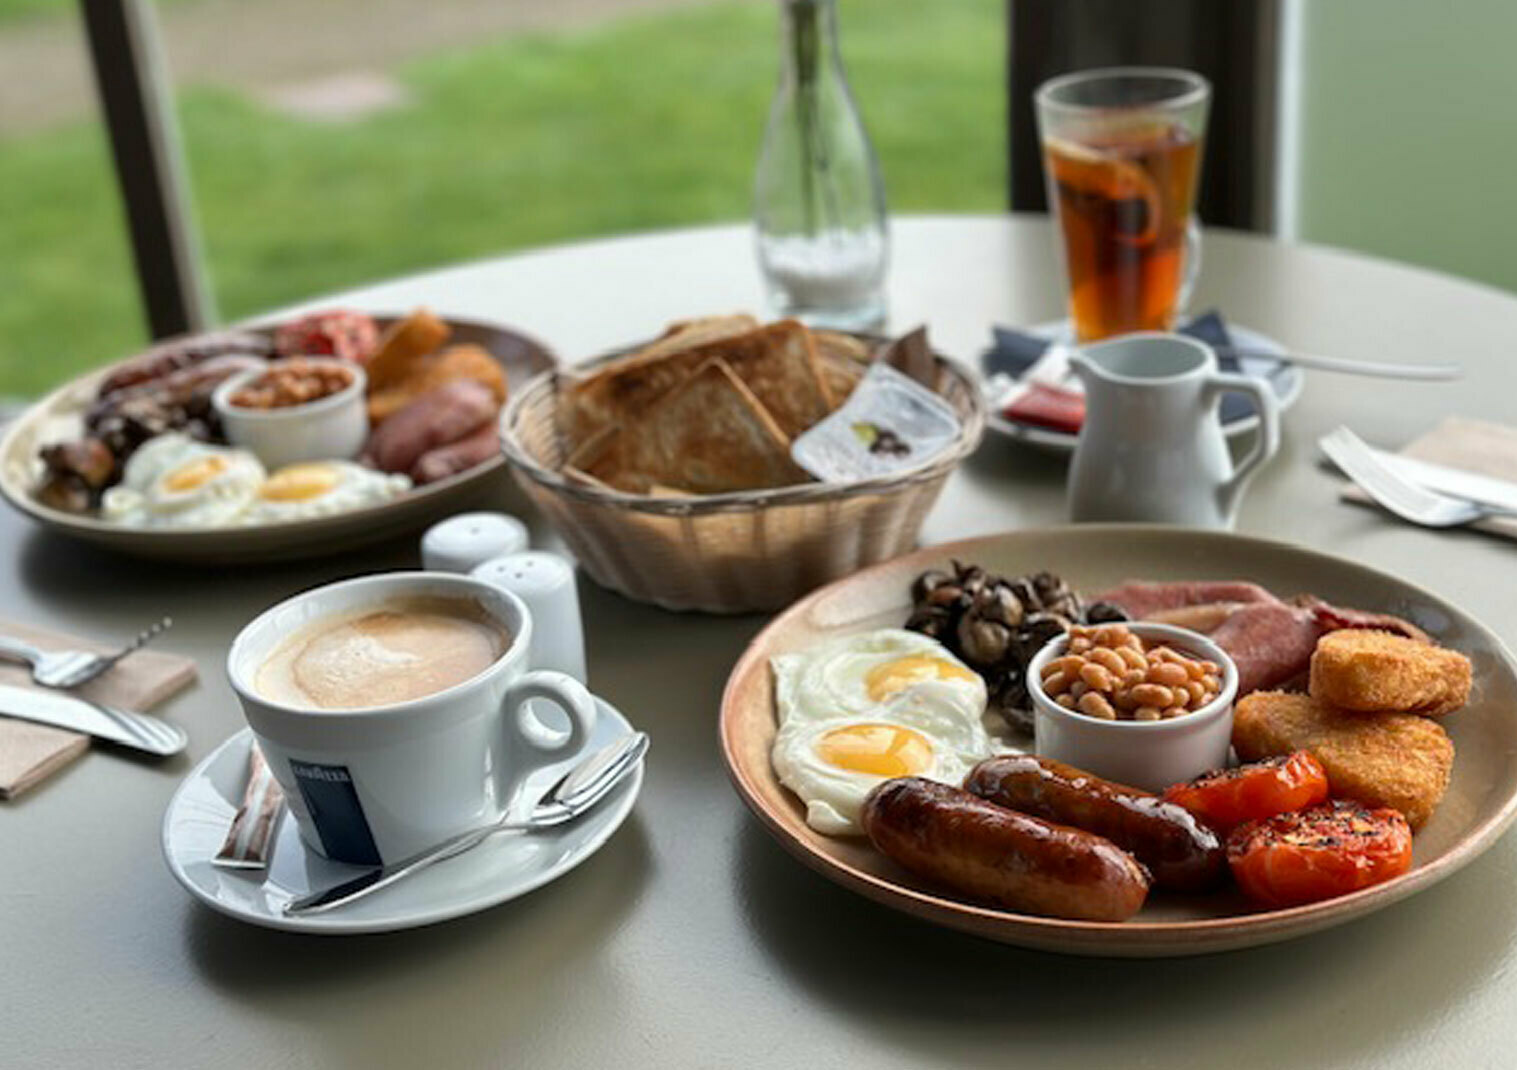 40% off Weekend Breakfast for 2 at Aha Restaurant